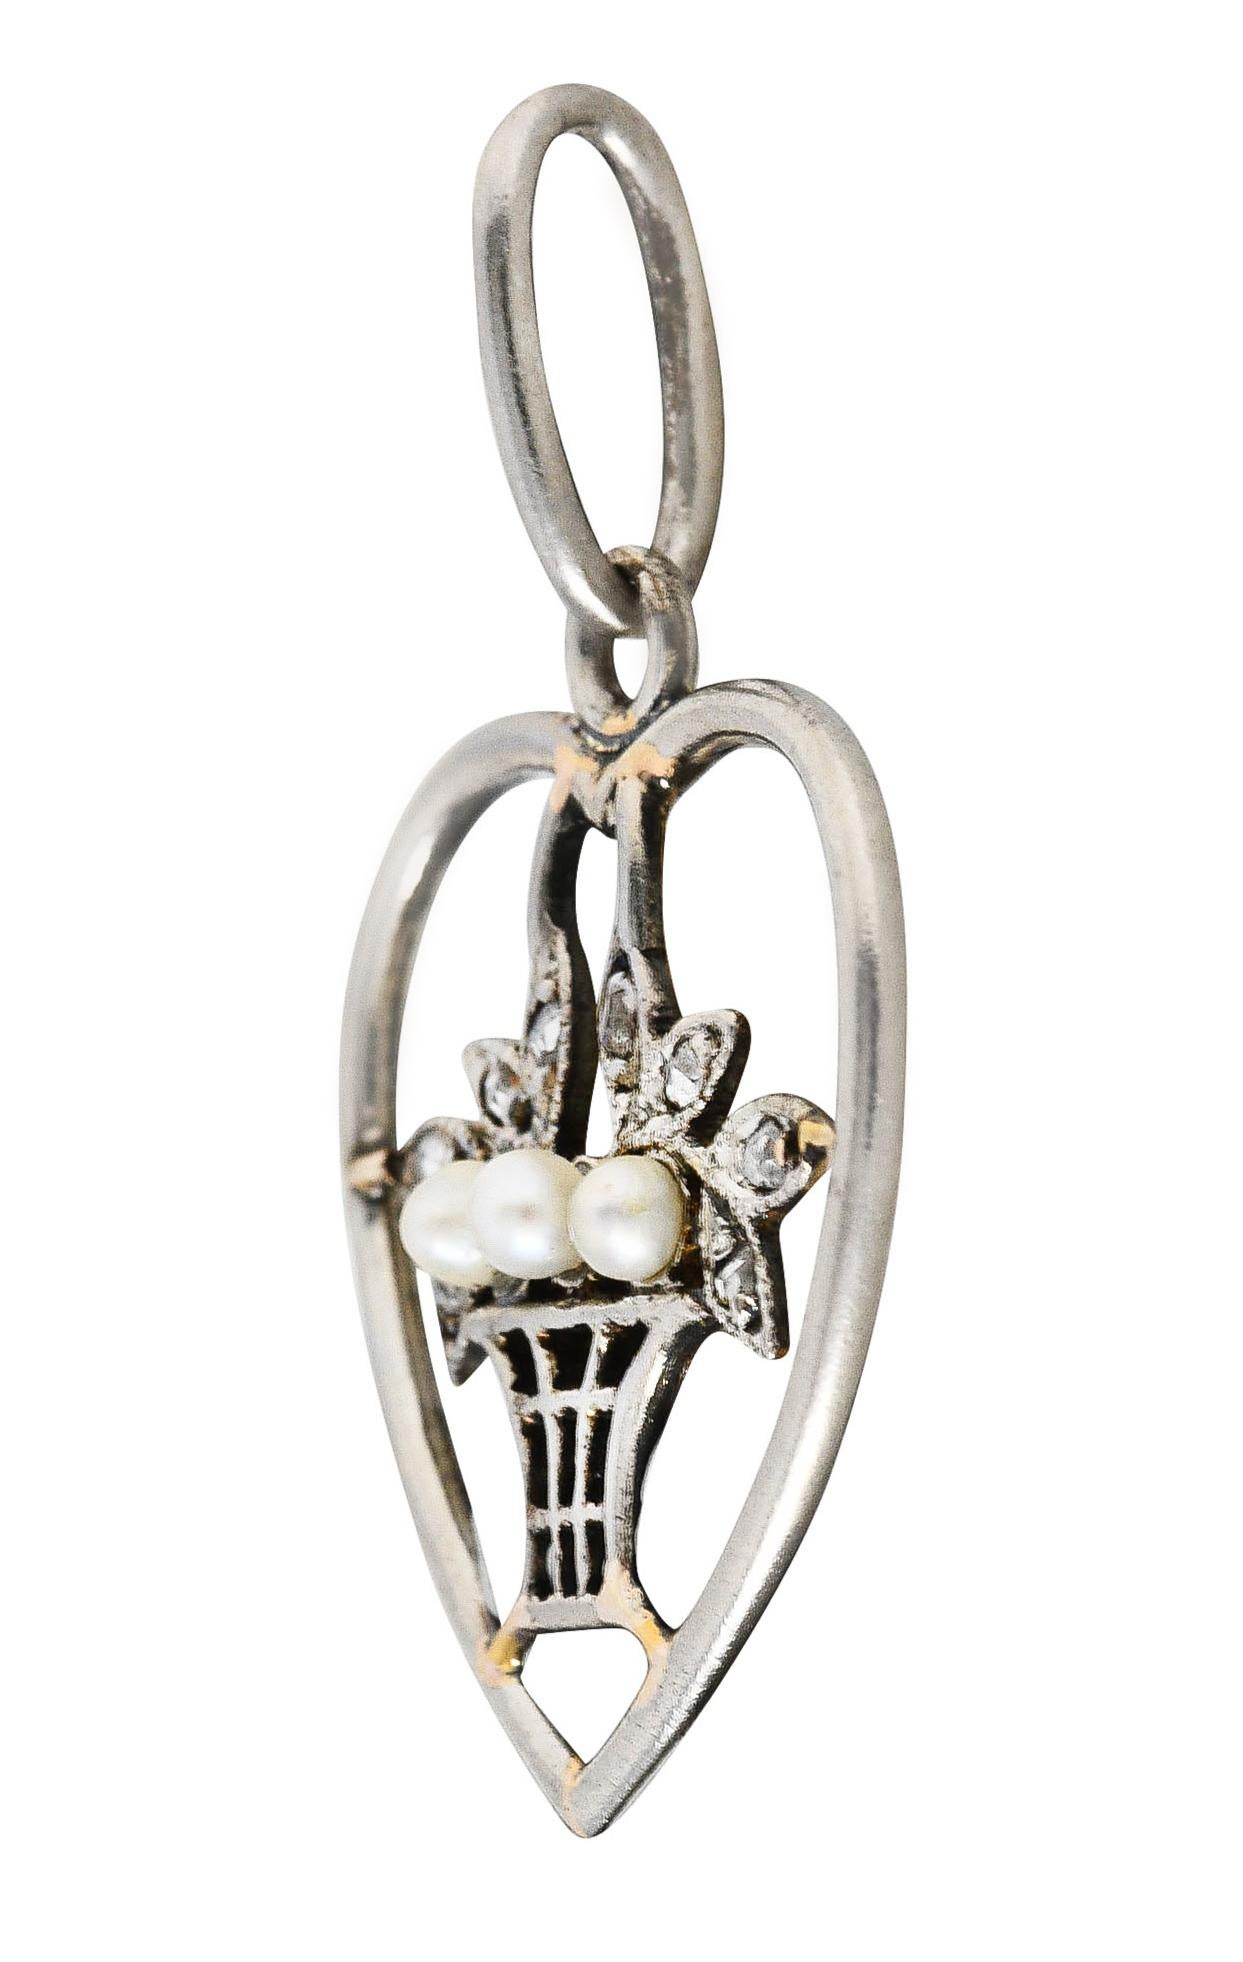 Giardinetto style charm features a striated basket overflowing with foliate and a heart surround. Accented by rose cut diamonds and featuring three 2.0 mm pearls. White in body color with very good luster. Tested as platinum-topped 18 karat gold.